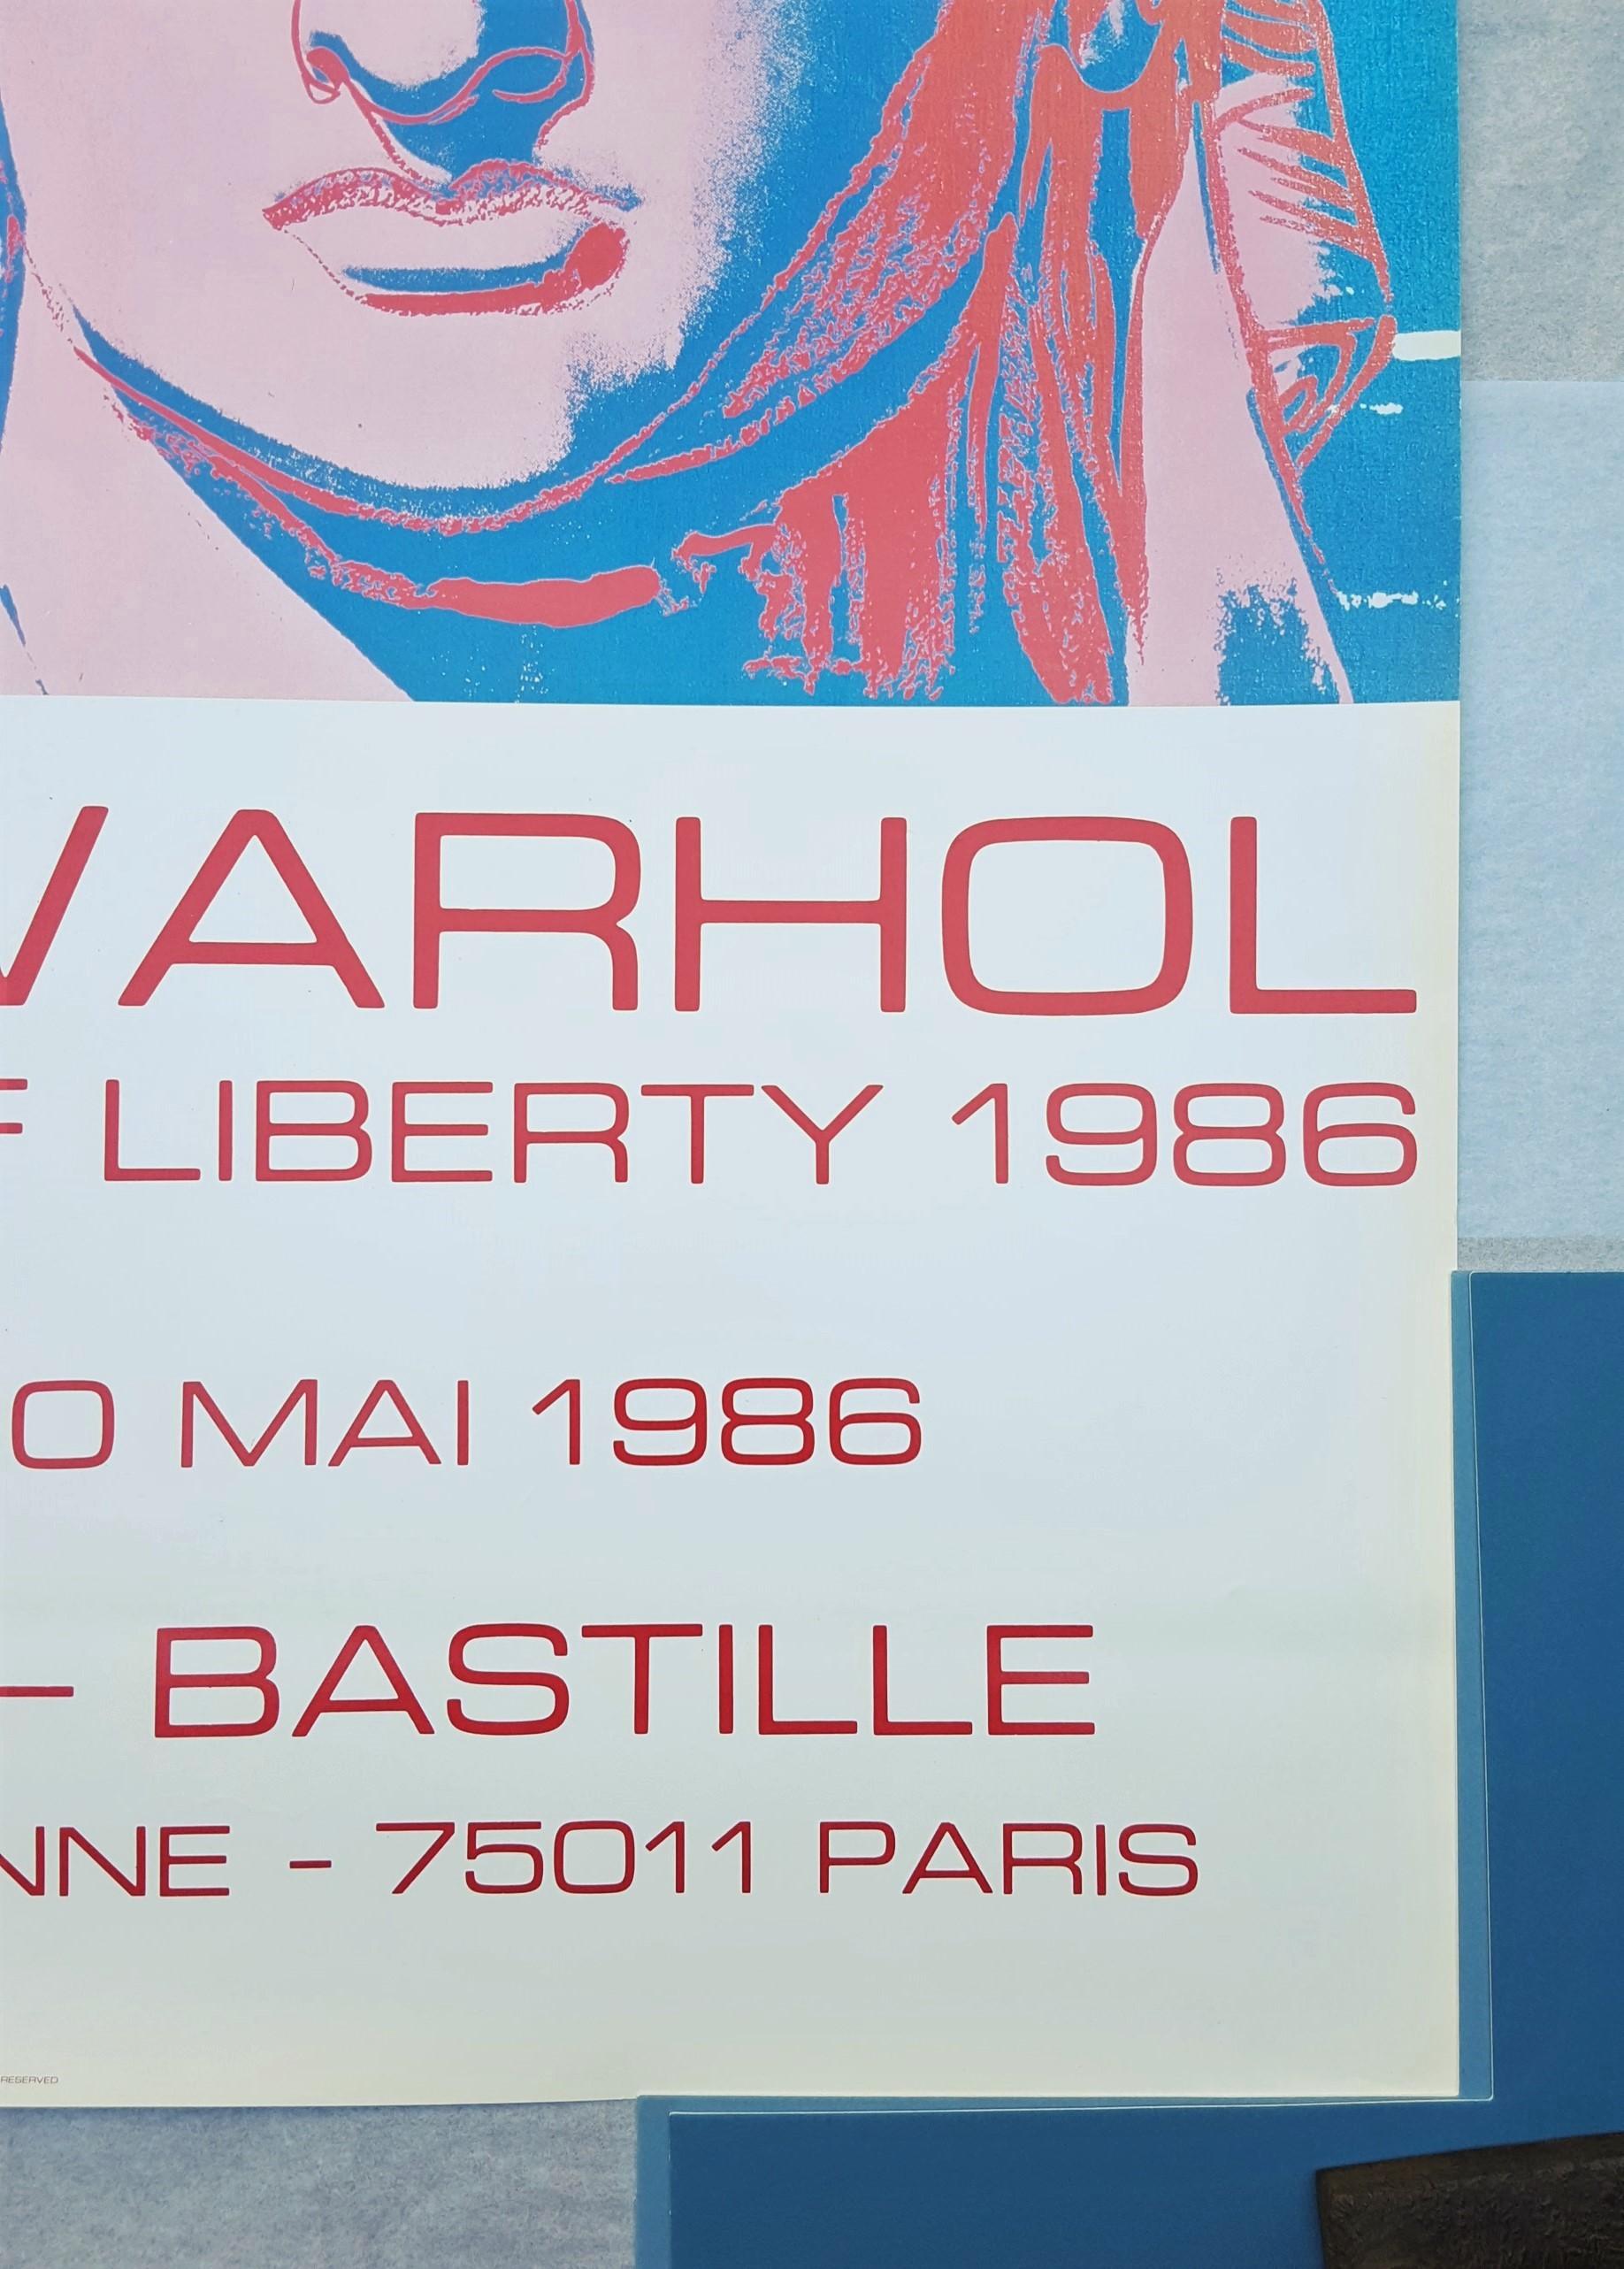 Galerie Lavignes Bastille (10 Statues of Liberty) - Pop Art Print by (after) Andy Warhol